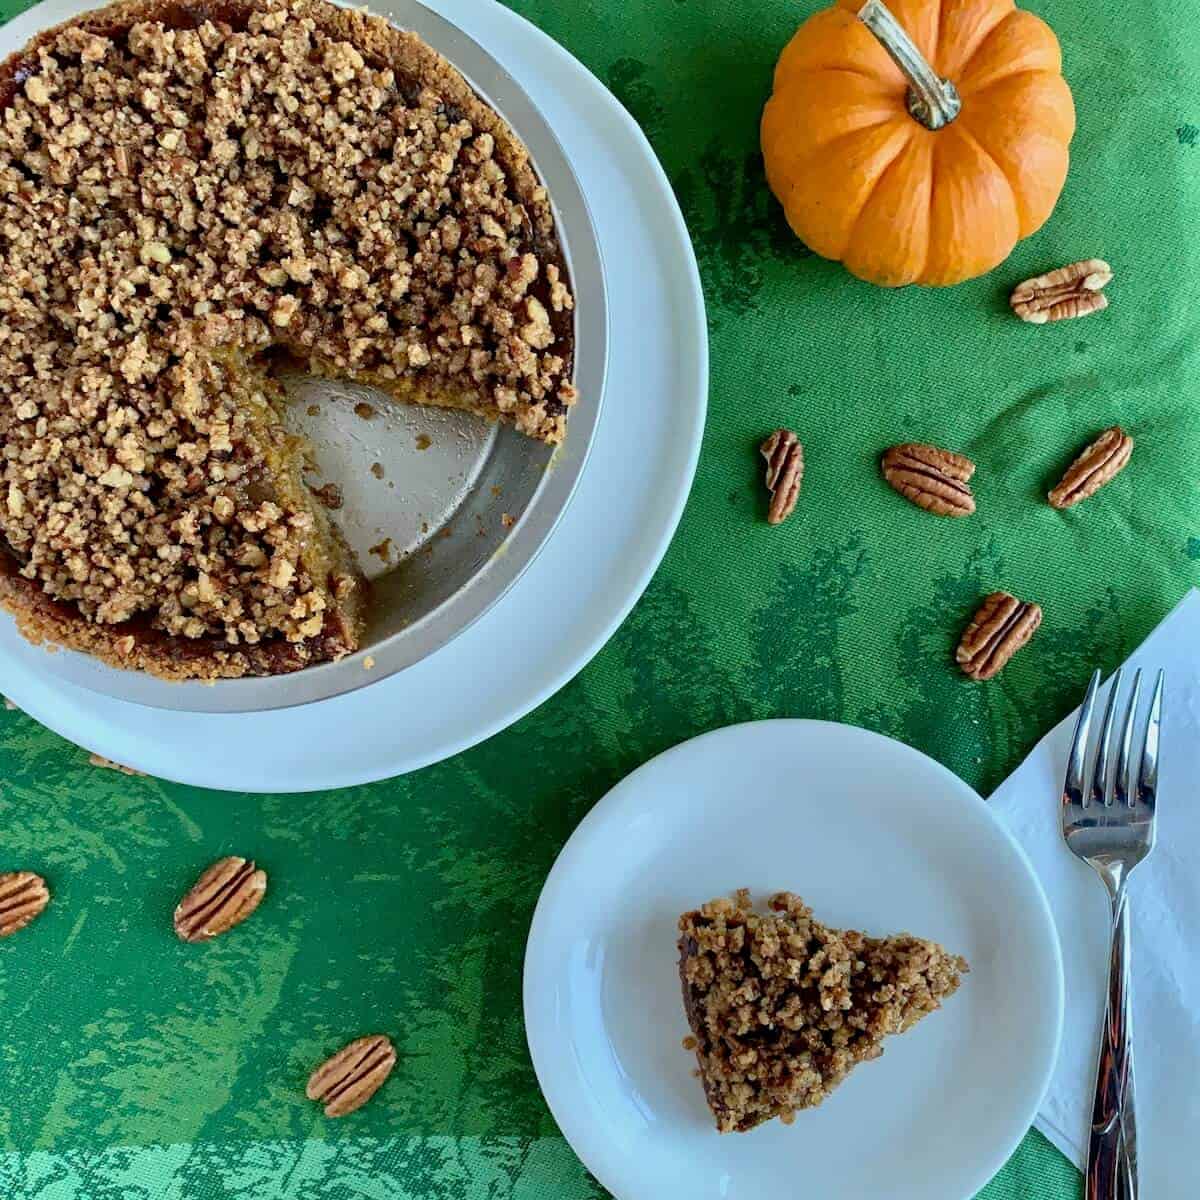 Praline Pumpkin Pie in pie pan with a slice on a white plate next to pumpkin & scattered pecans from overhead.